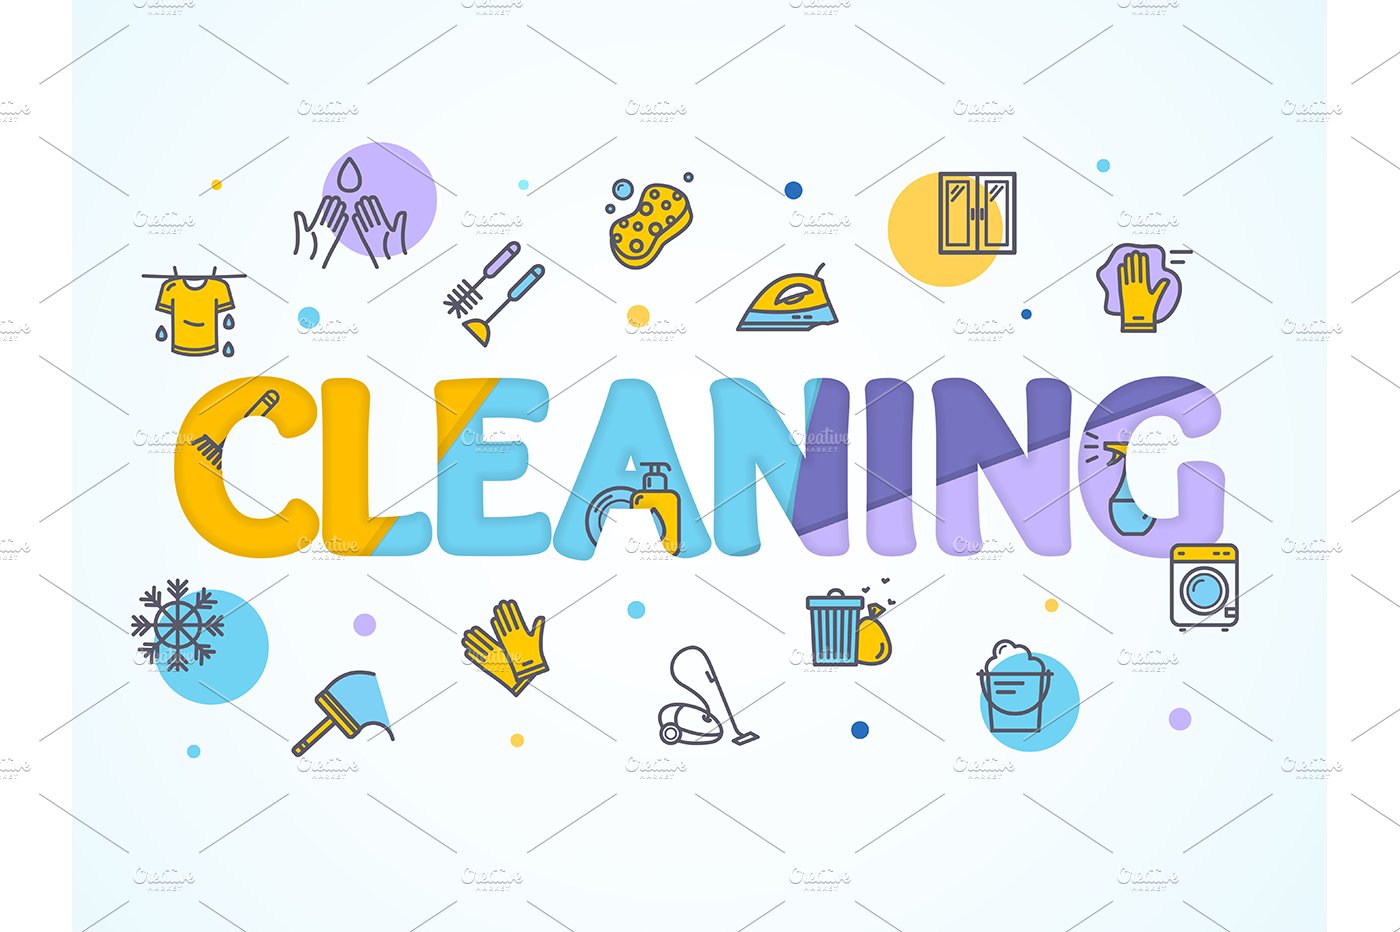 Cleaning Service Concept Paper cover image.